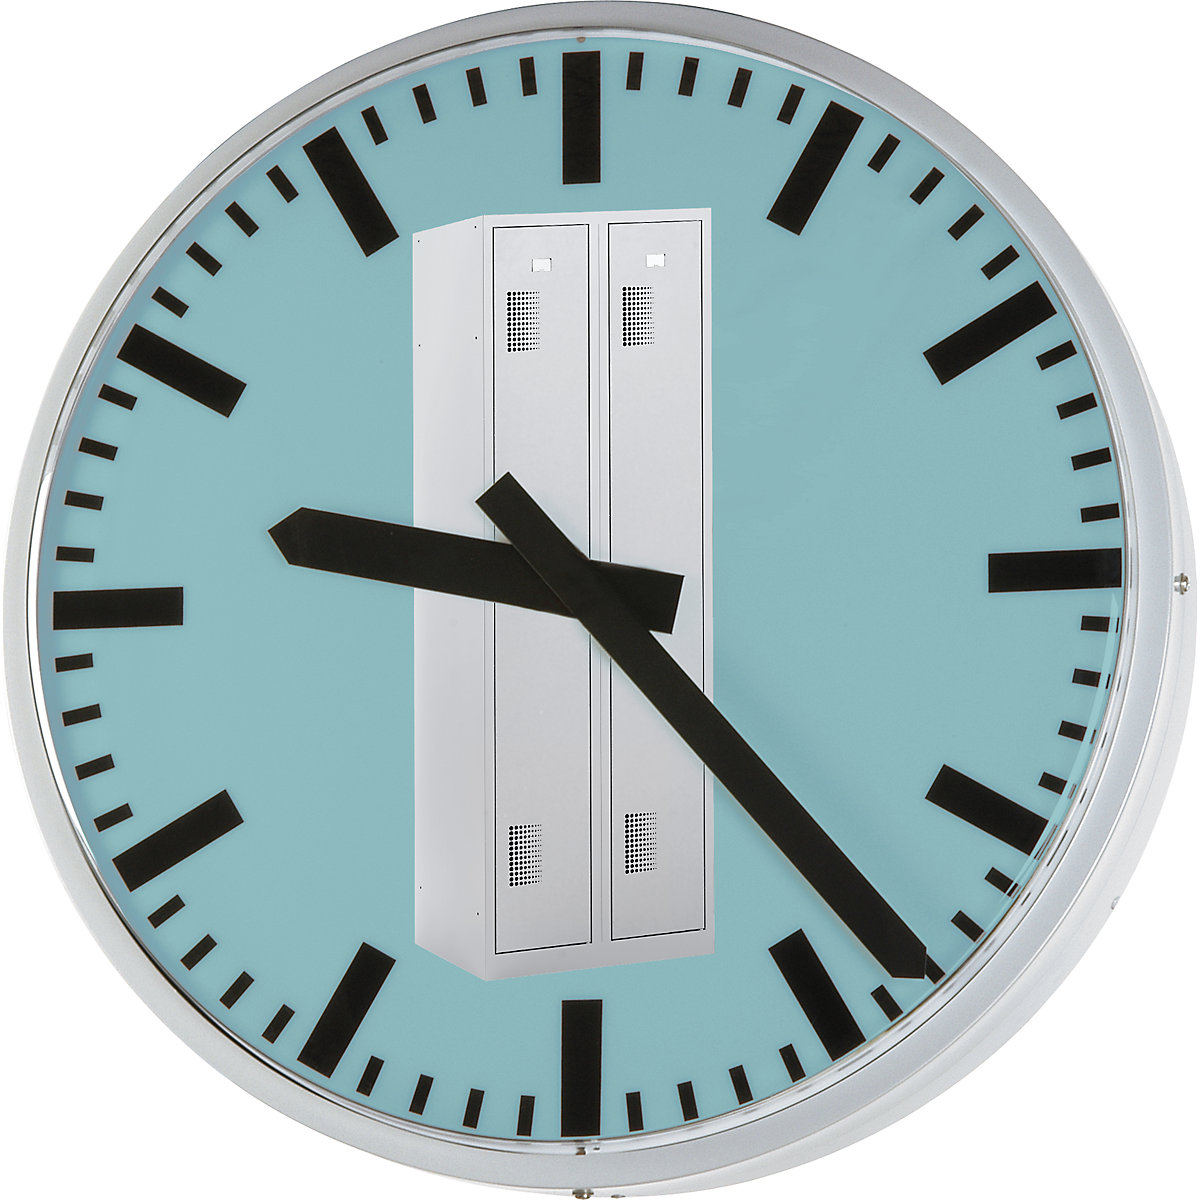 Clock face with individual design